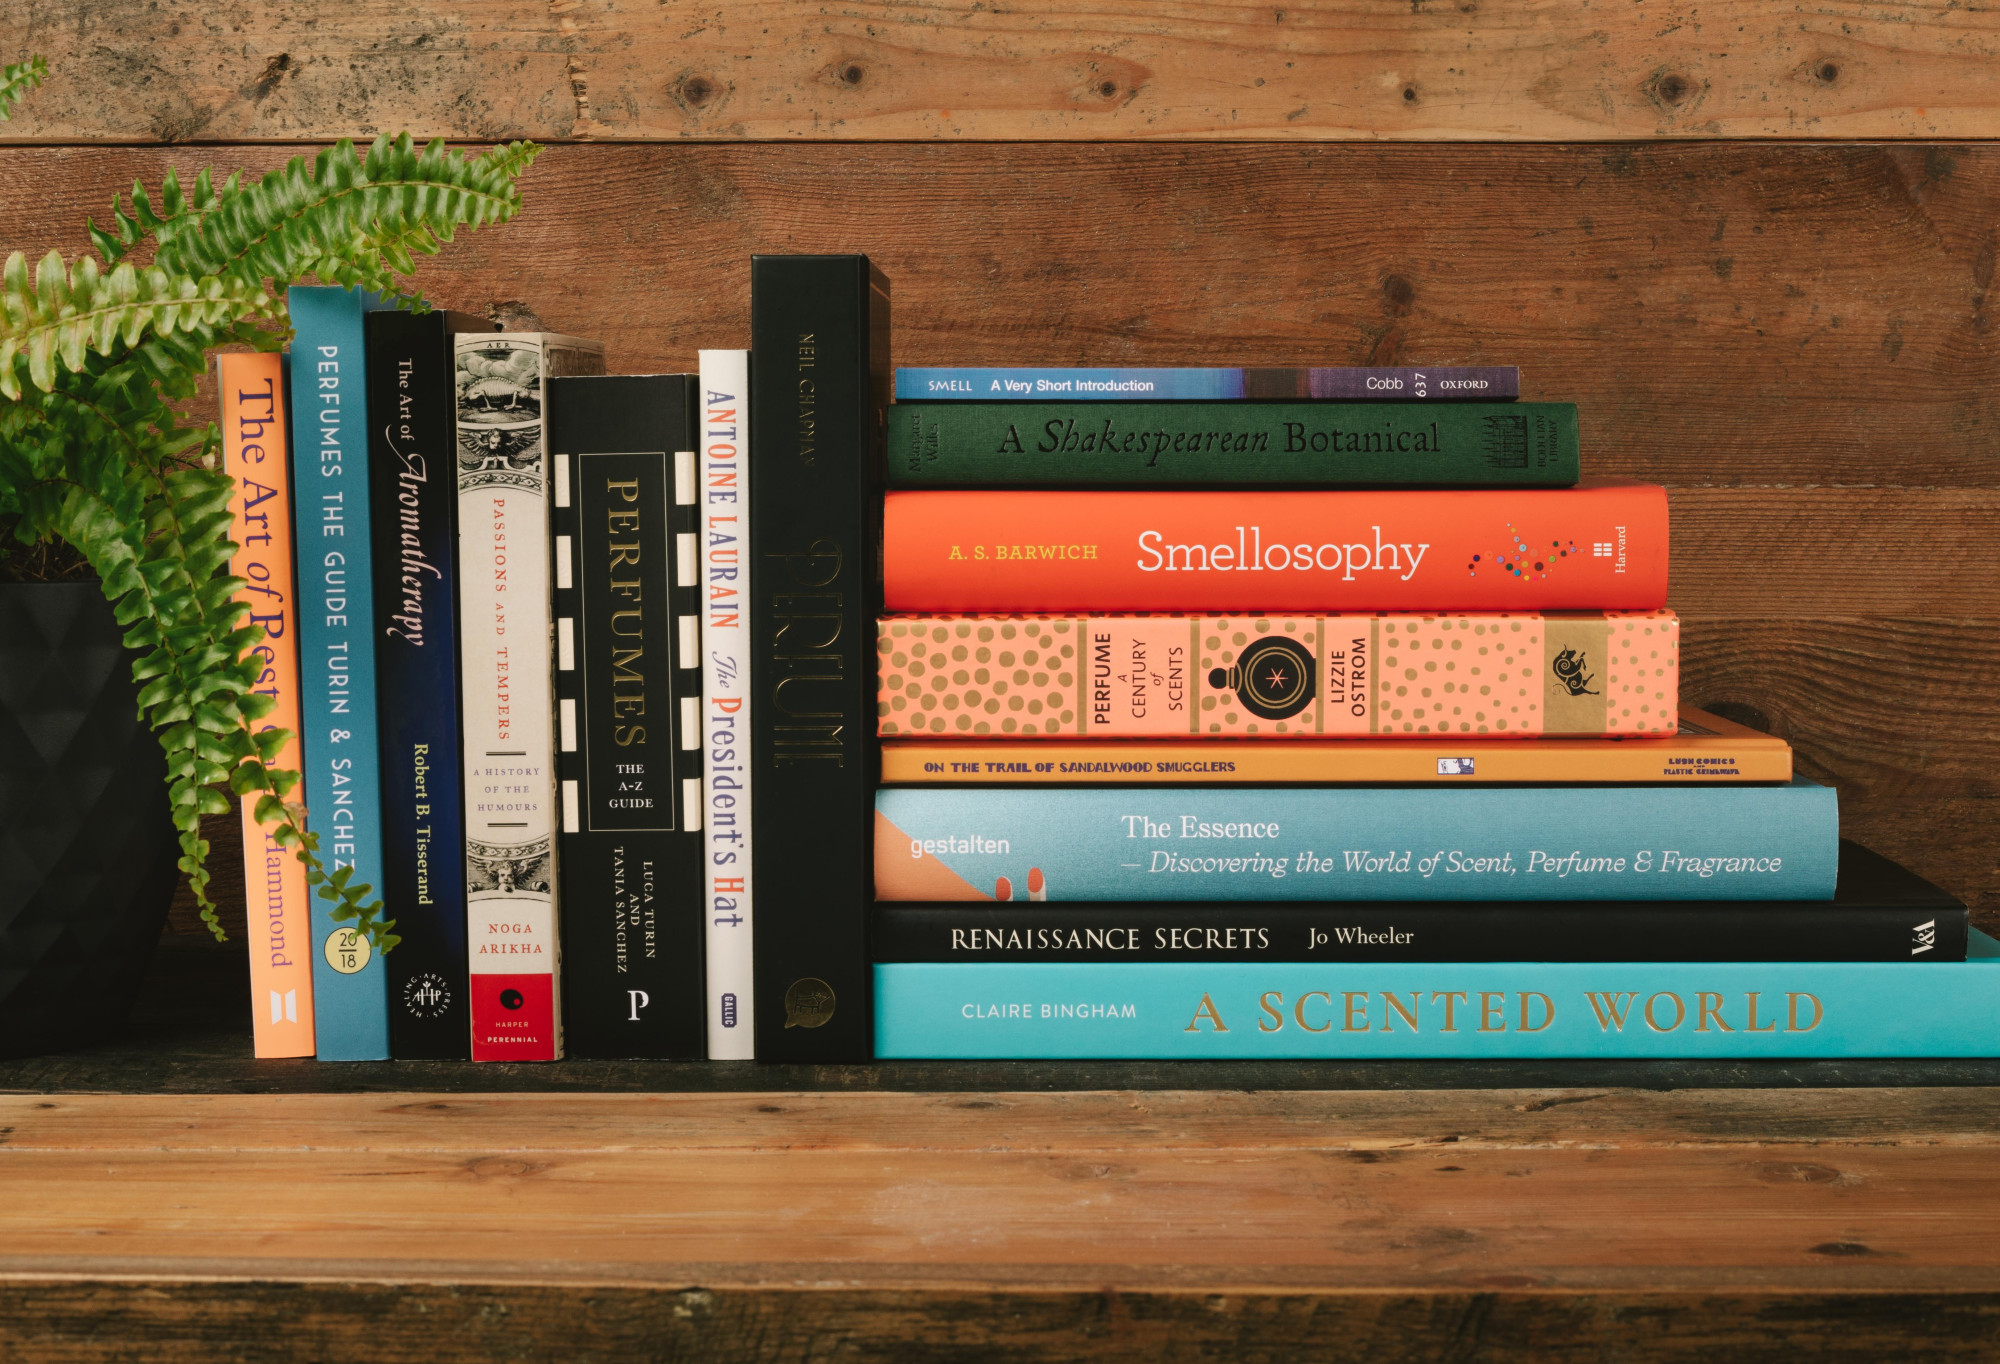 A collection of books Lush stocks, on a wooden background with a fern plant to the left.